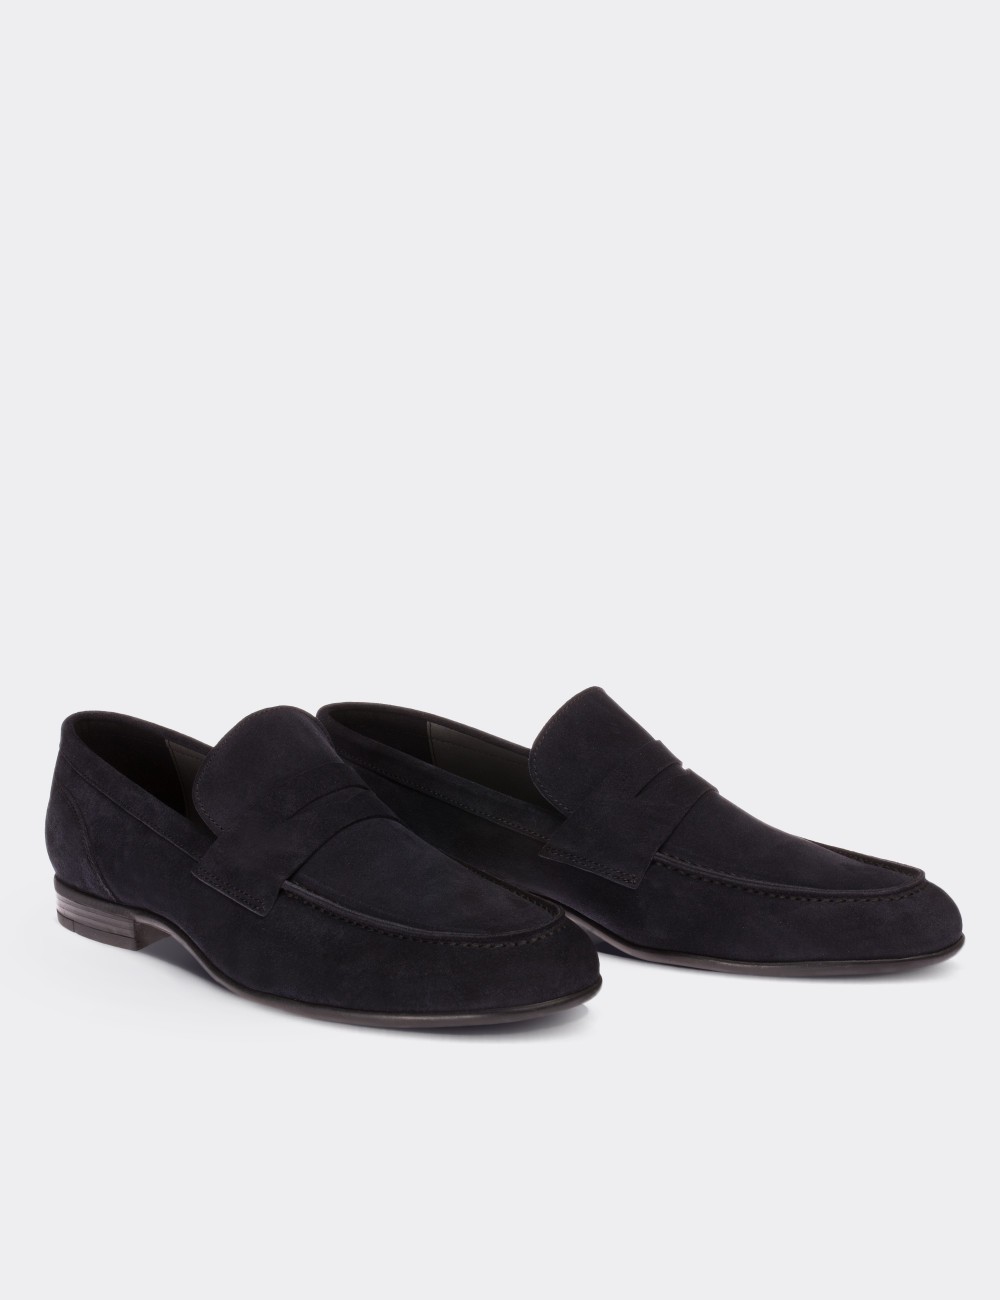 Navy Suede Leather Loafers - 01714MLCVC01